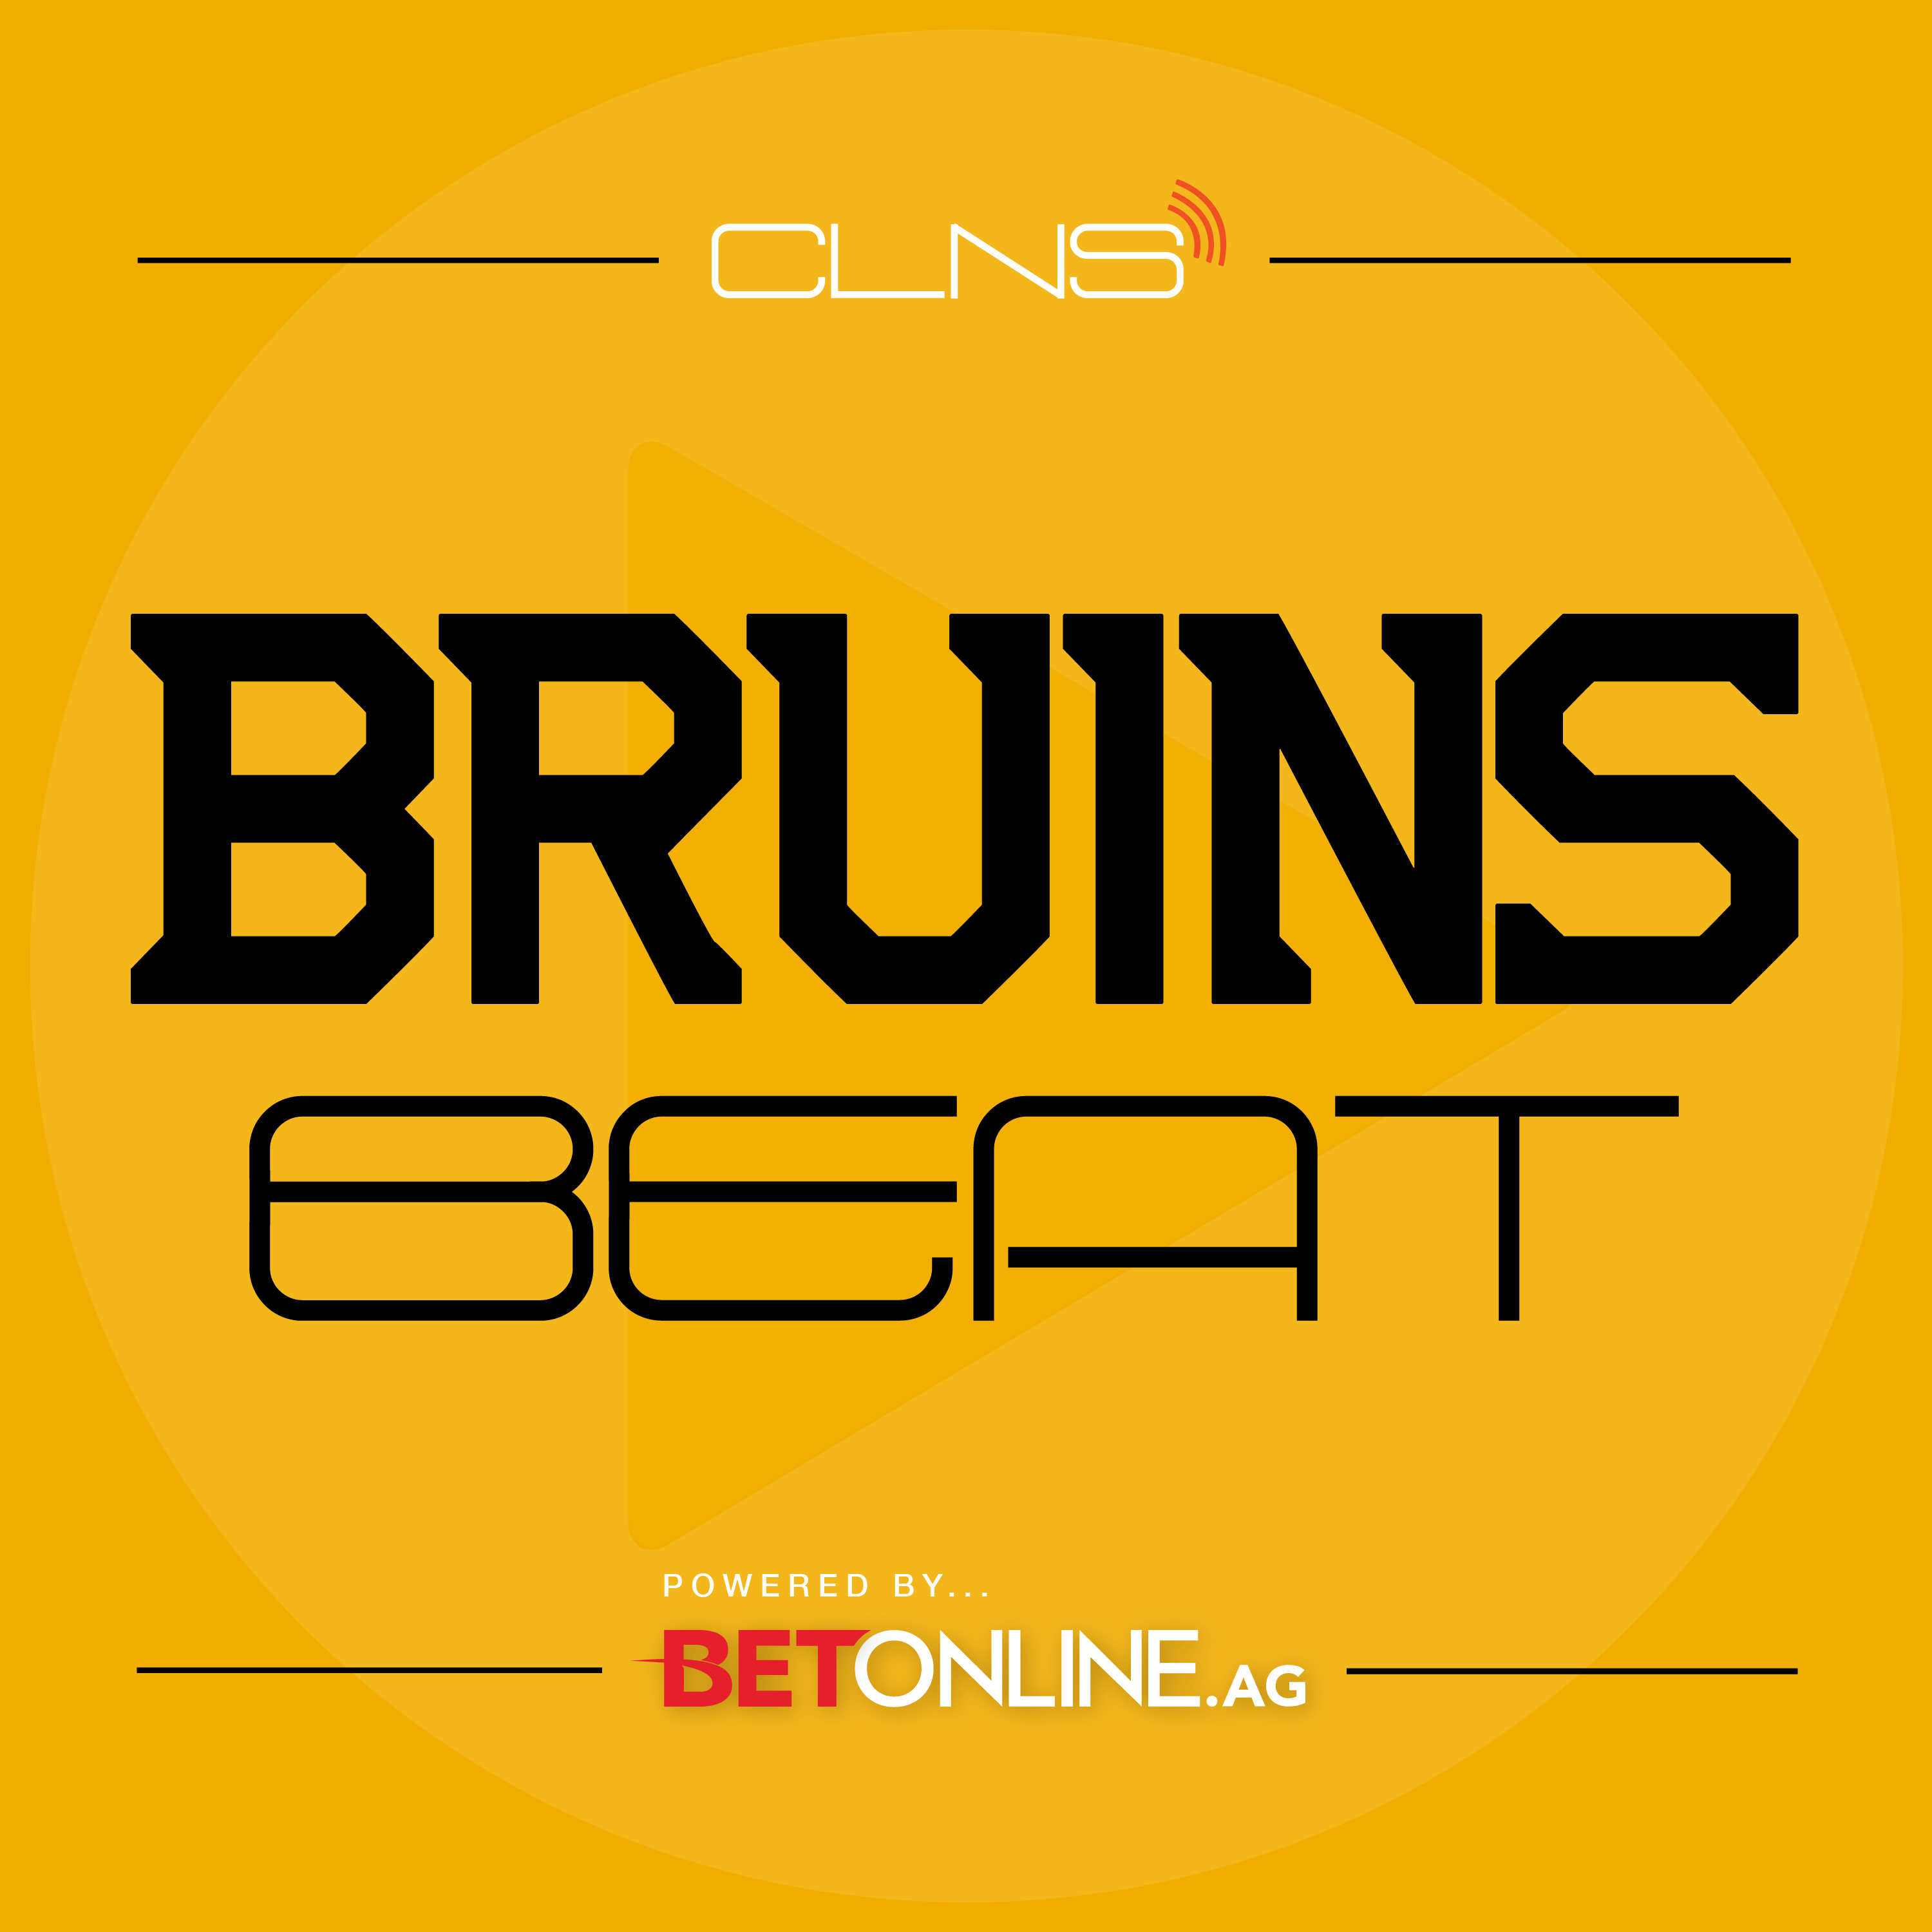 A highlight from Brad Marchand in a Slump & Comparing this Bruins Team to Past Teams | Conor Ryan | Bruins Beat w/ Evan Marinofsky